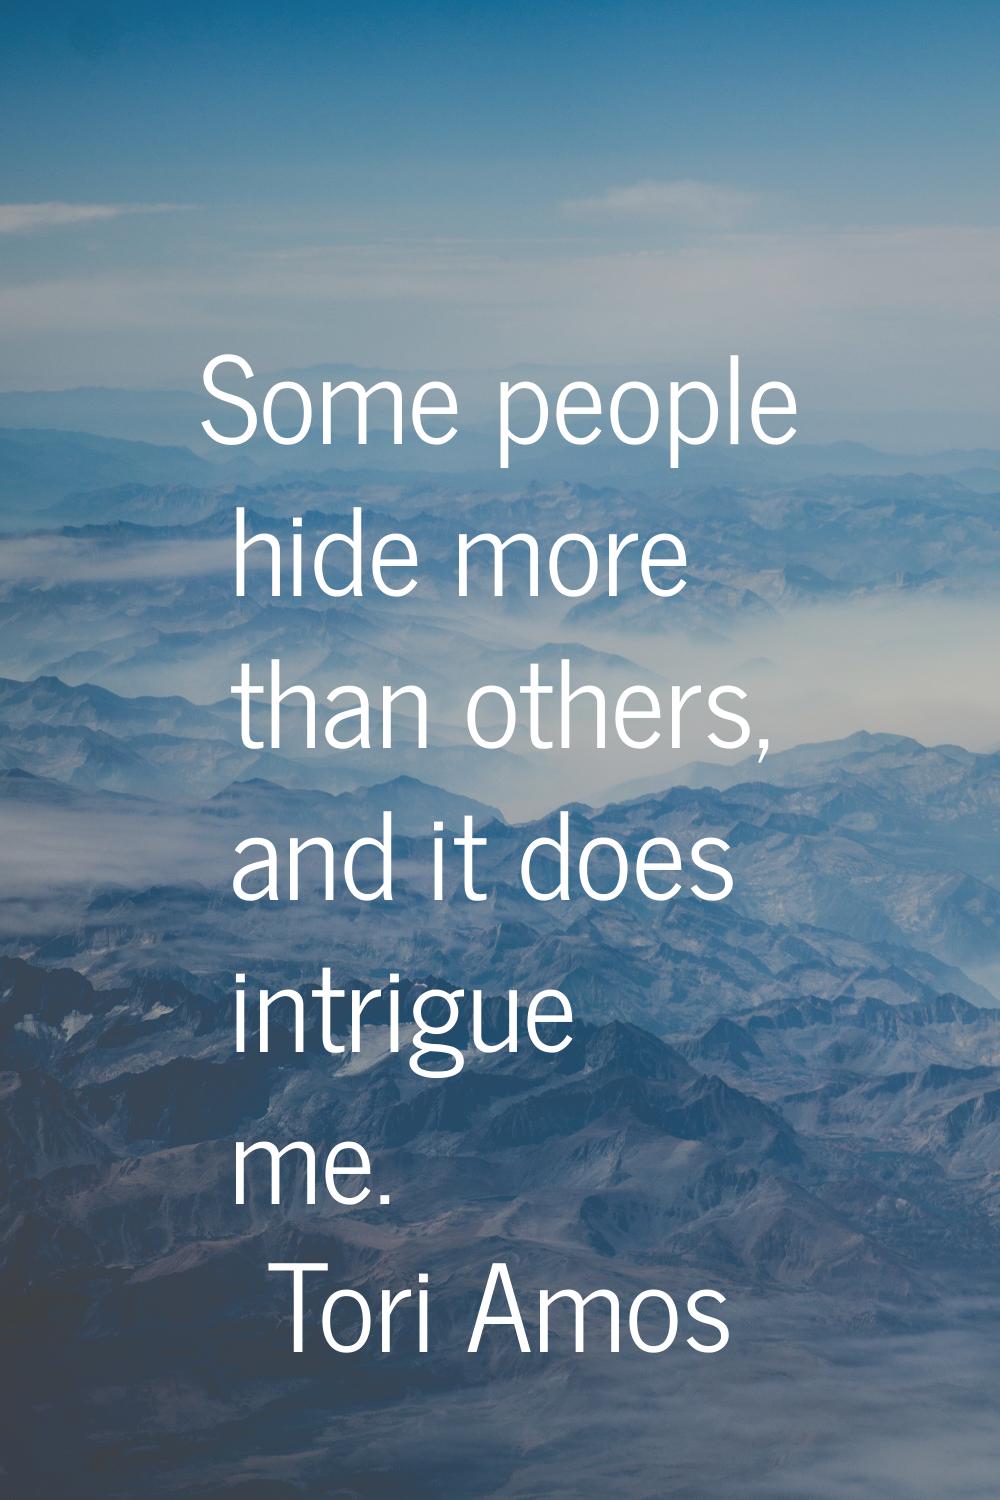 Some people hide more than others, and it does intrigue me.